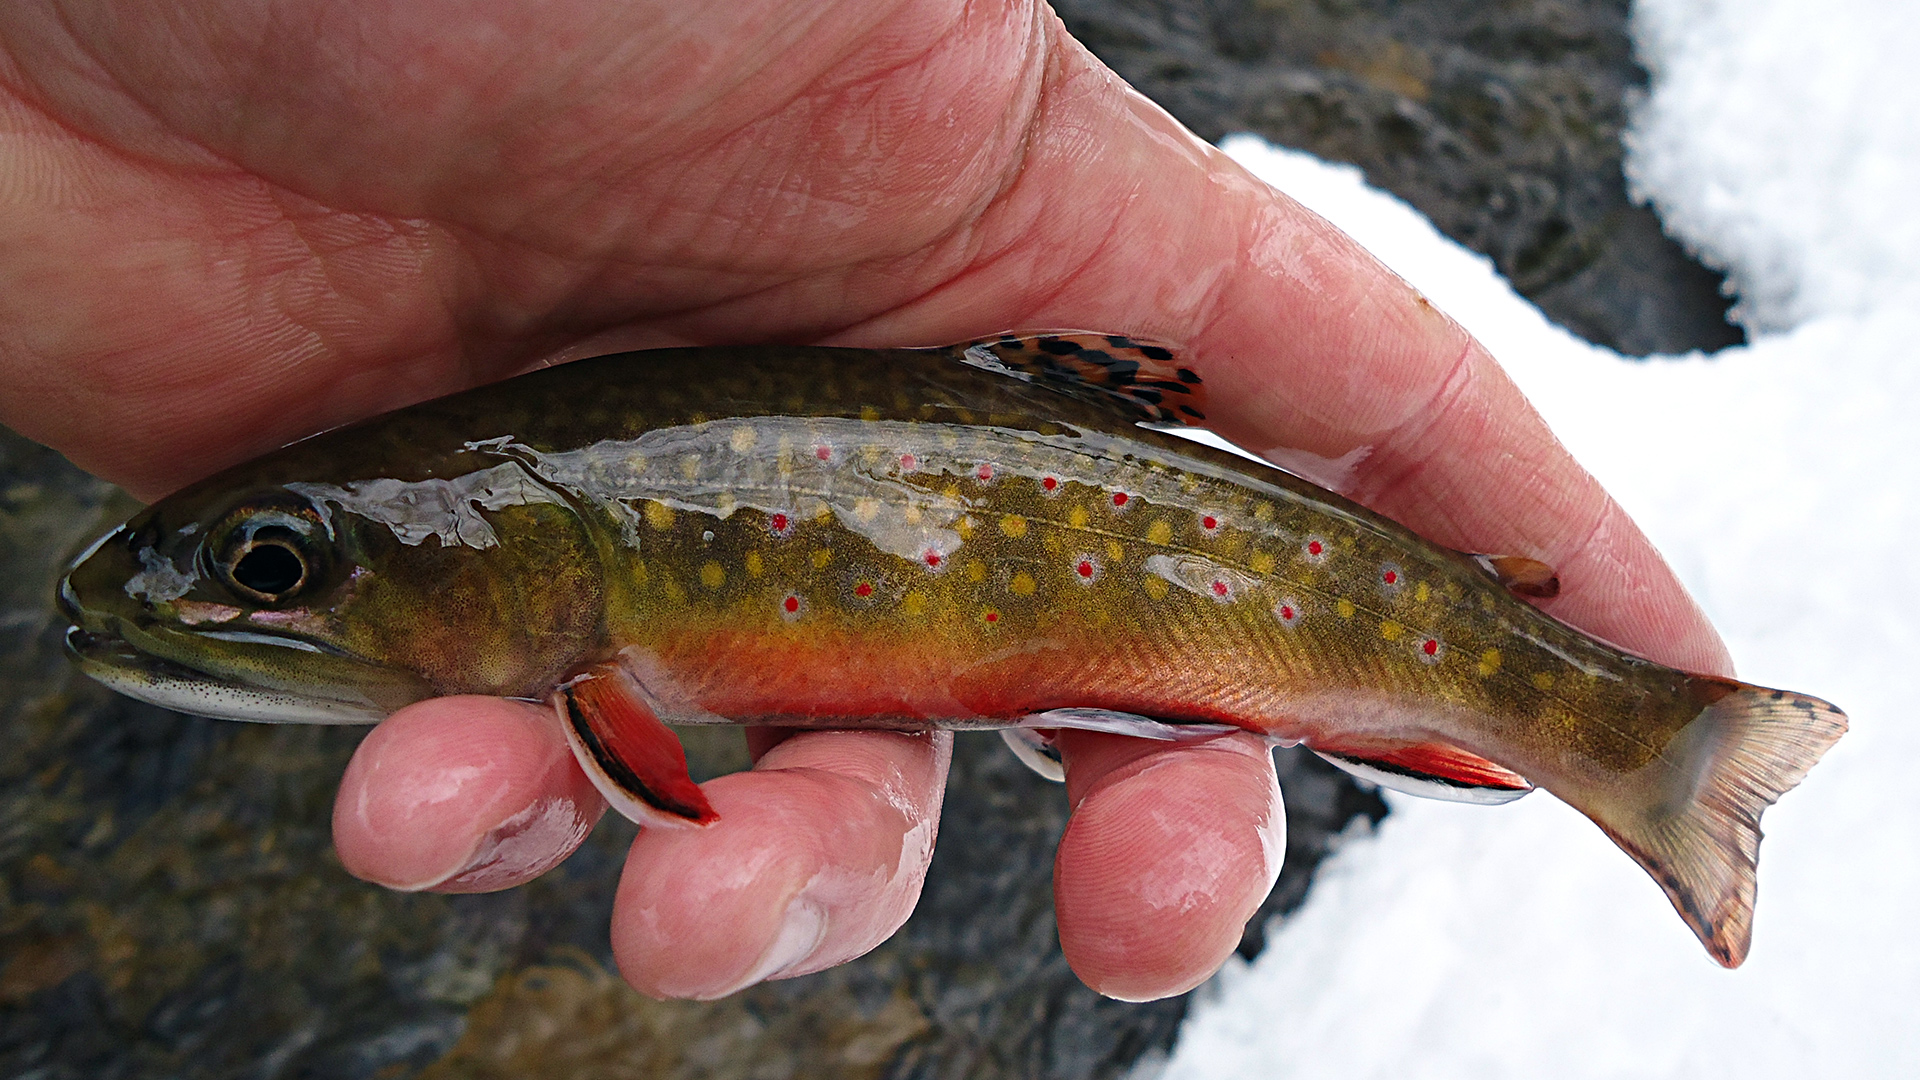 The Southern Brook Char, or Southern Brookie, or speckled trout, or just plain speck, depending on who's telling the fish story